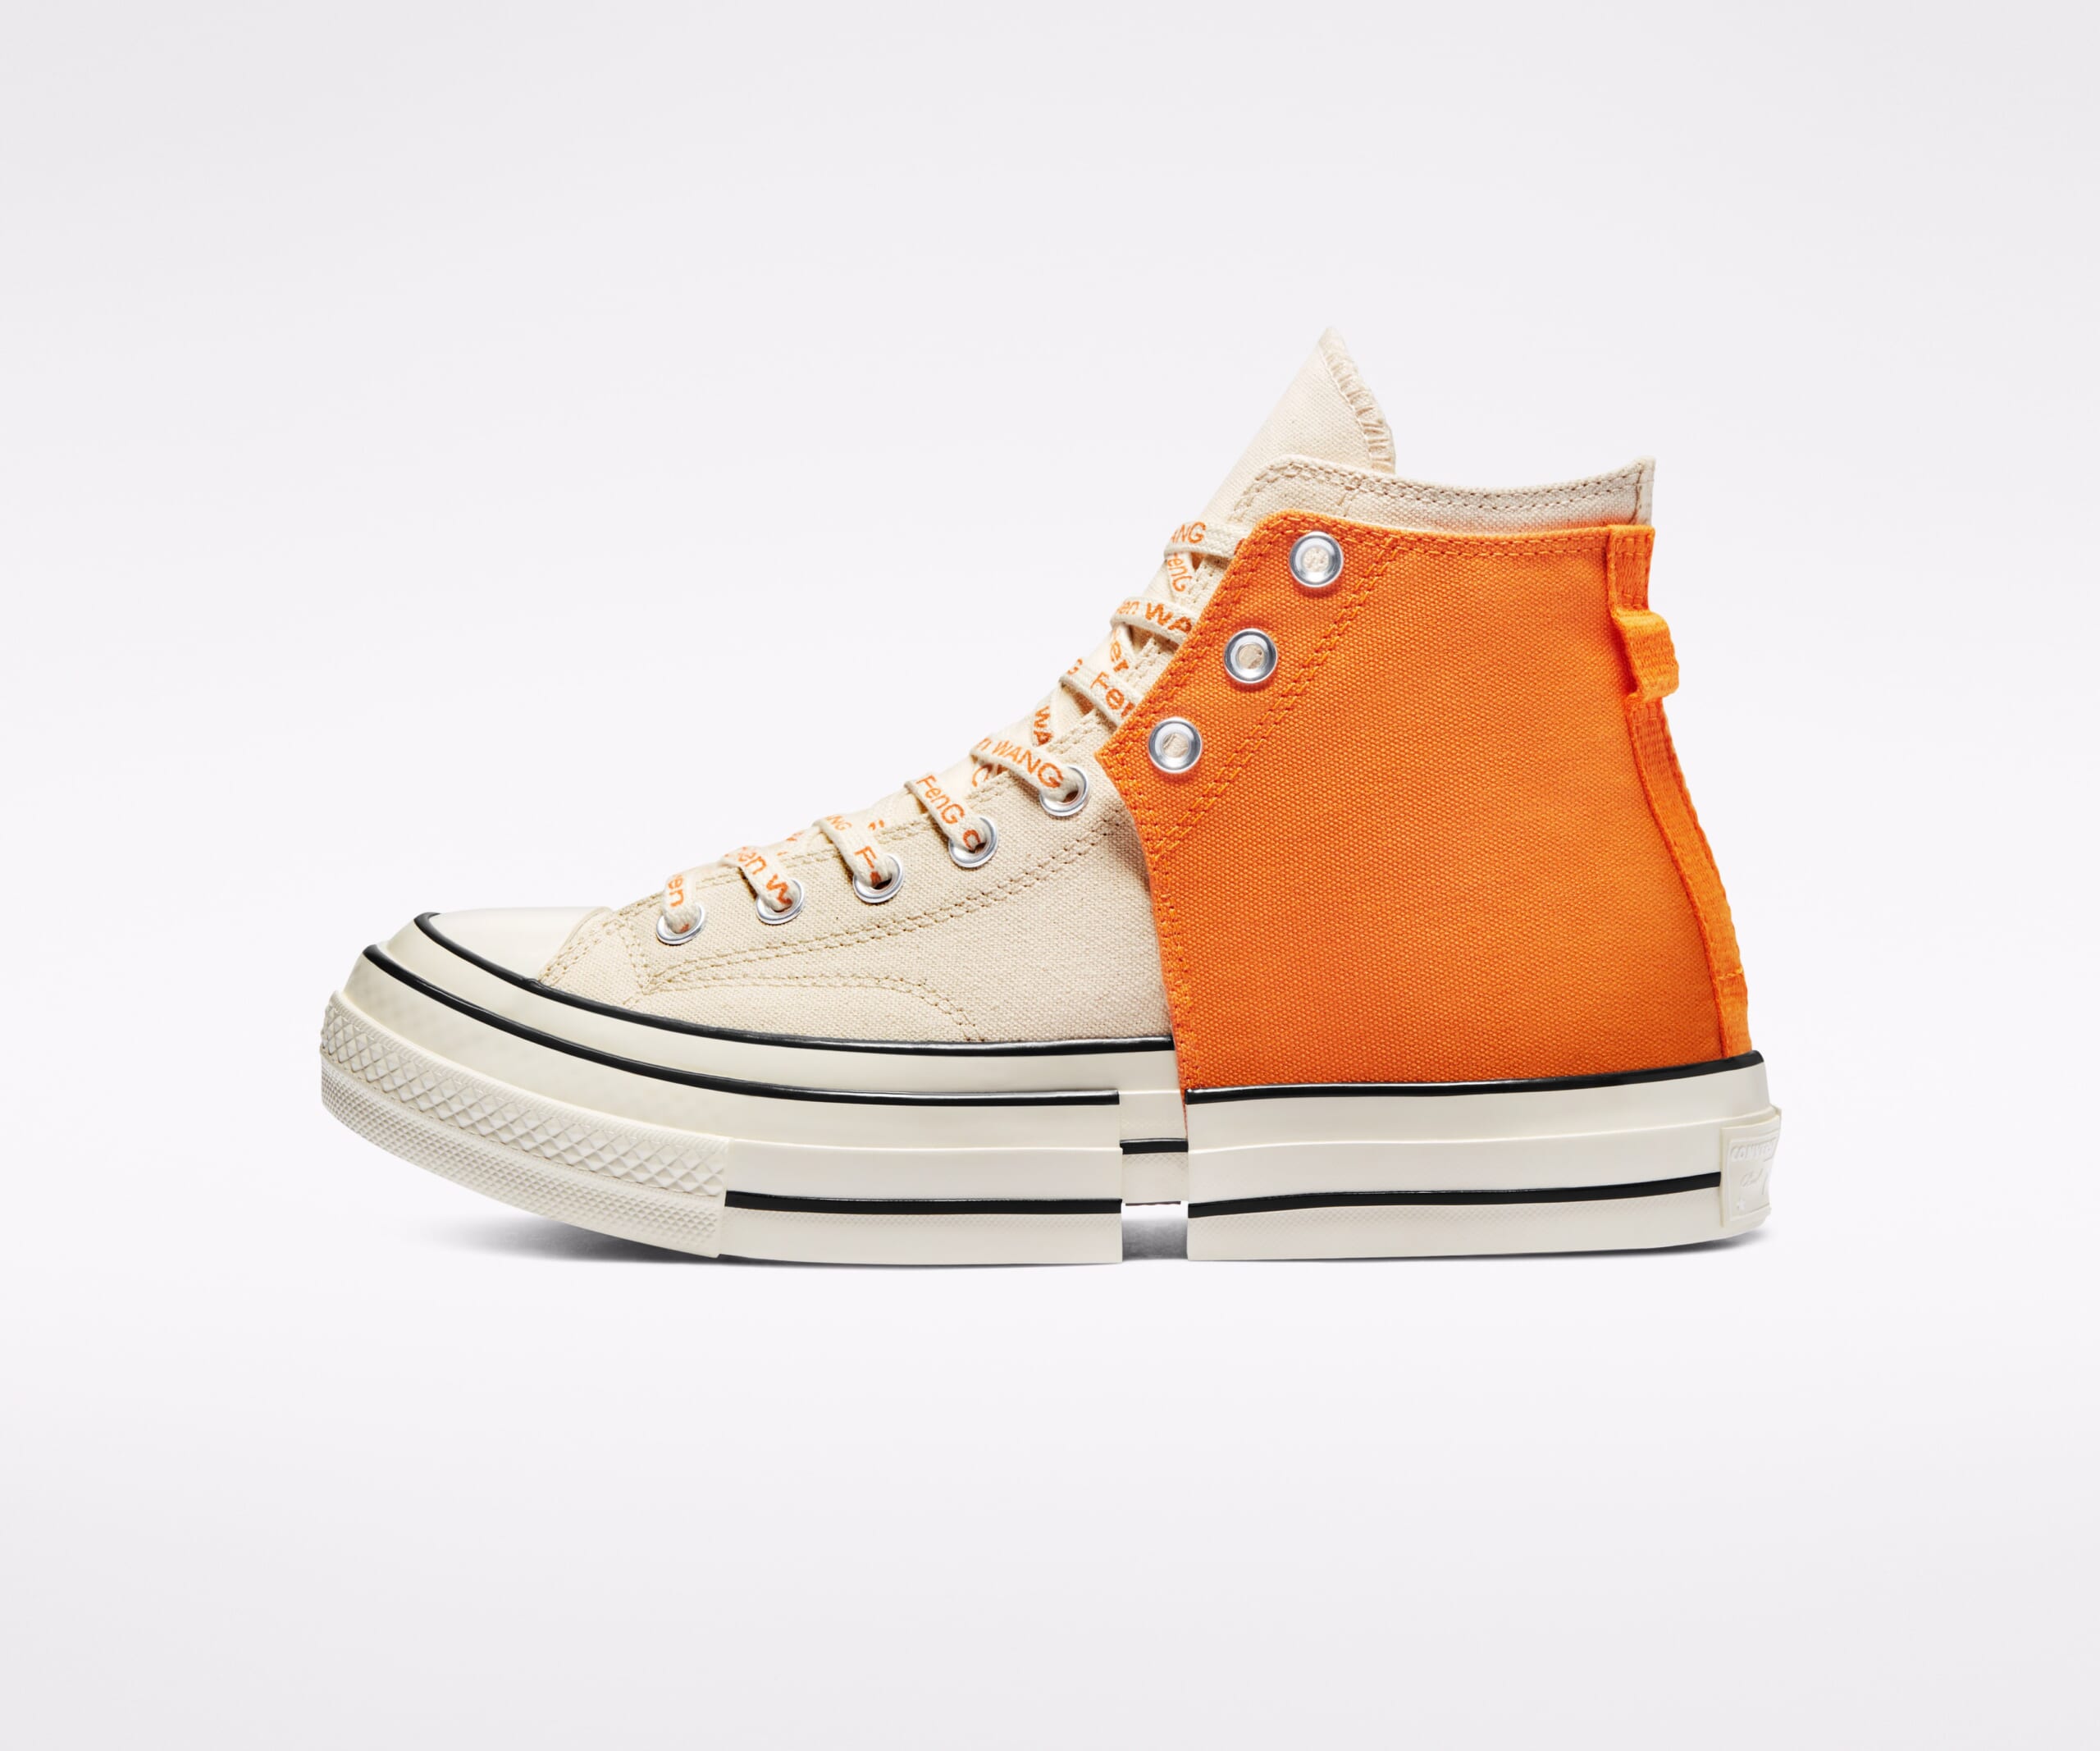 Marte Intercambiar equipaje These Converse Limited Edition Chuck 70s Are 2 Sneakers in One - Maxim